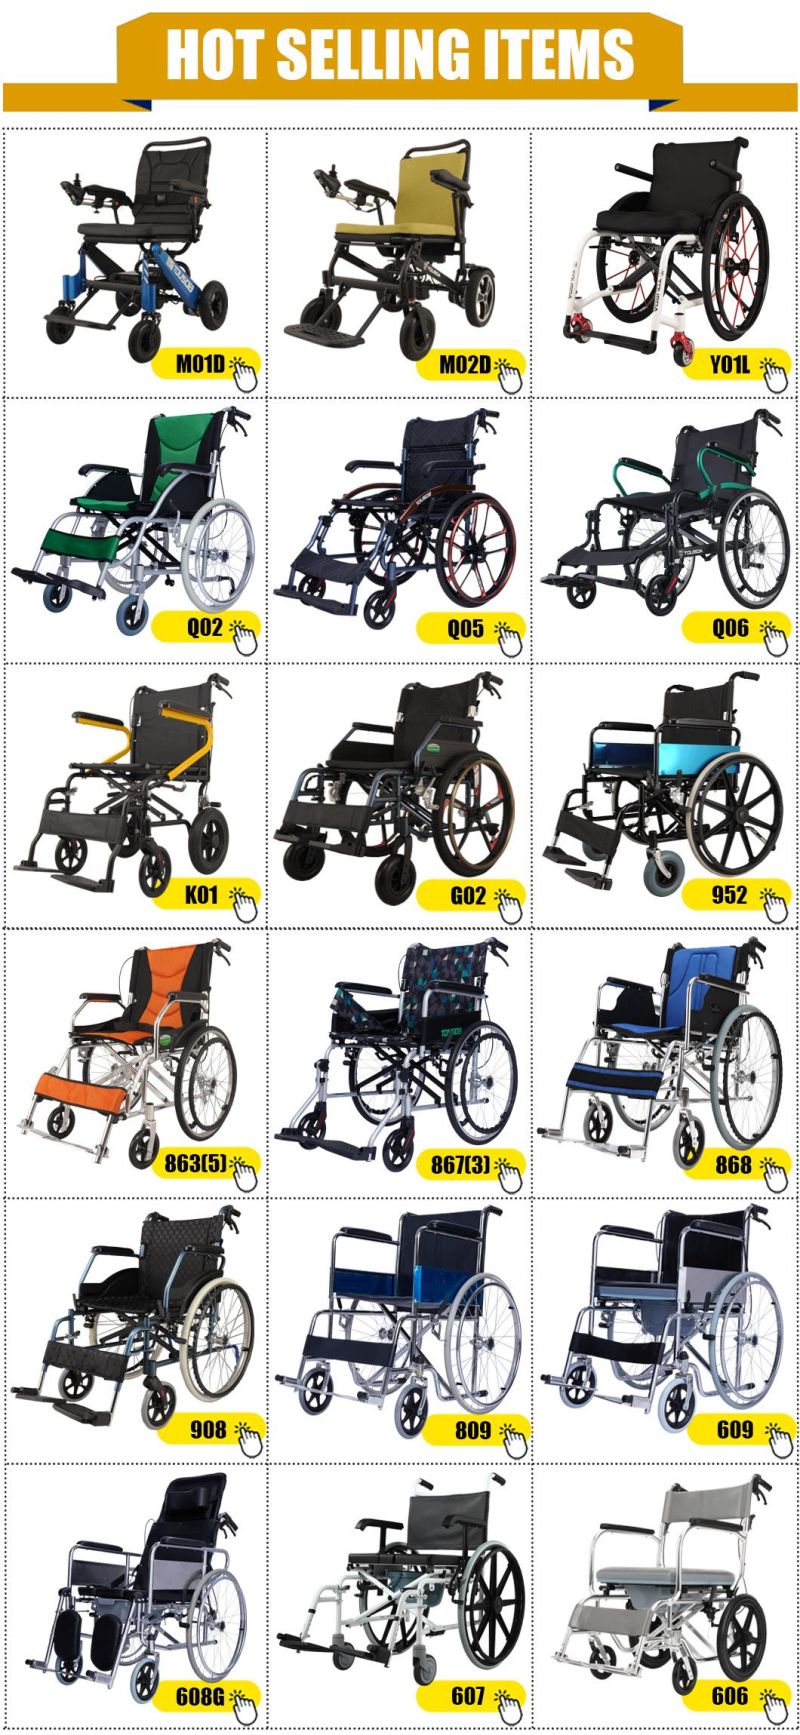 High Quality Indoor Mini Handicapped Electric Wheelchair Power Drive Wheel Chair